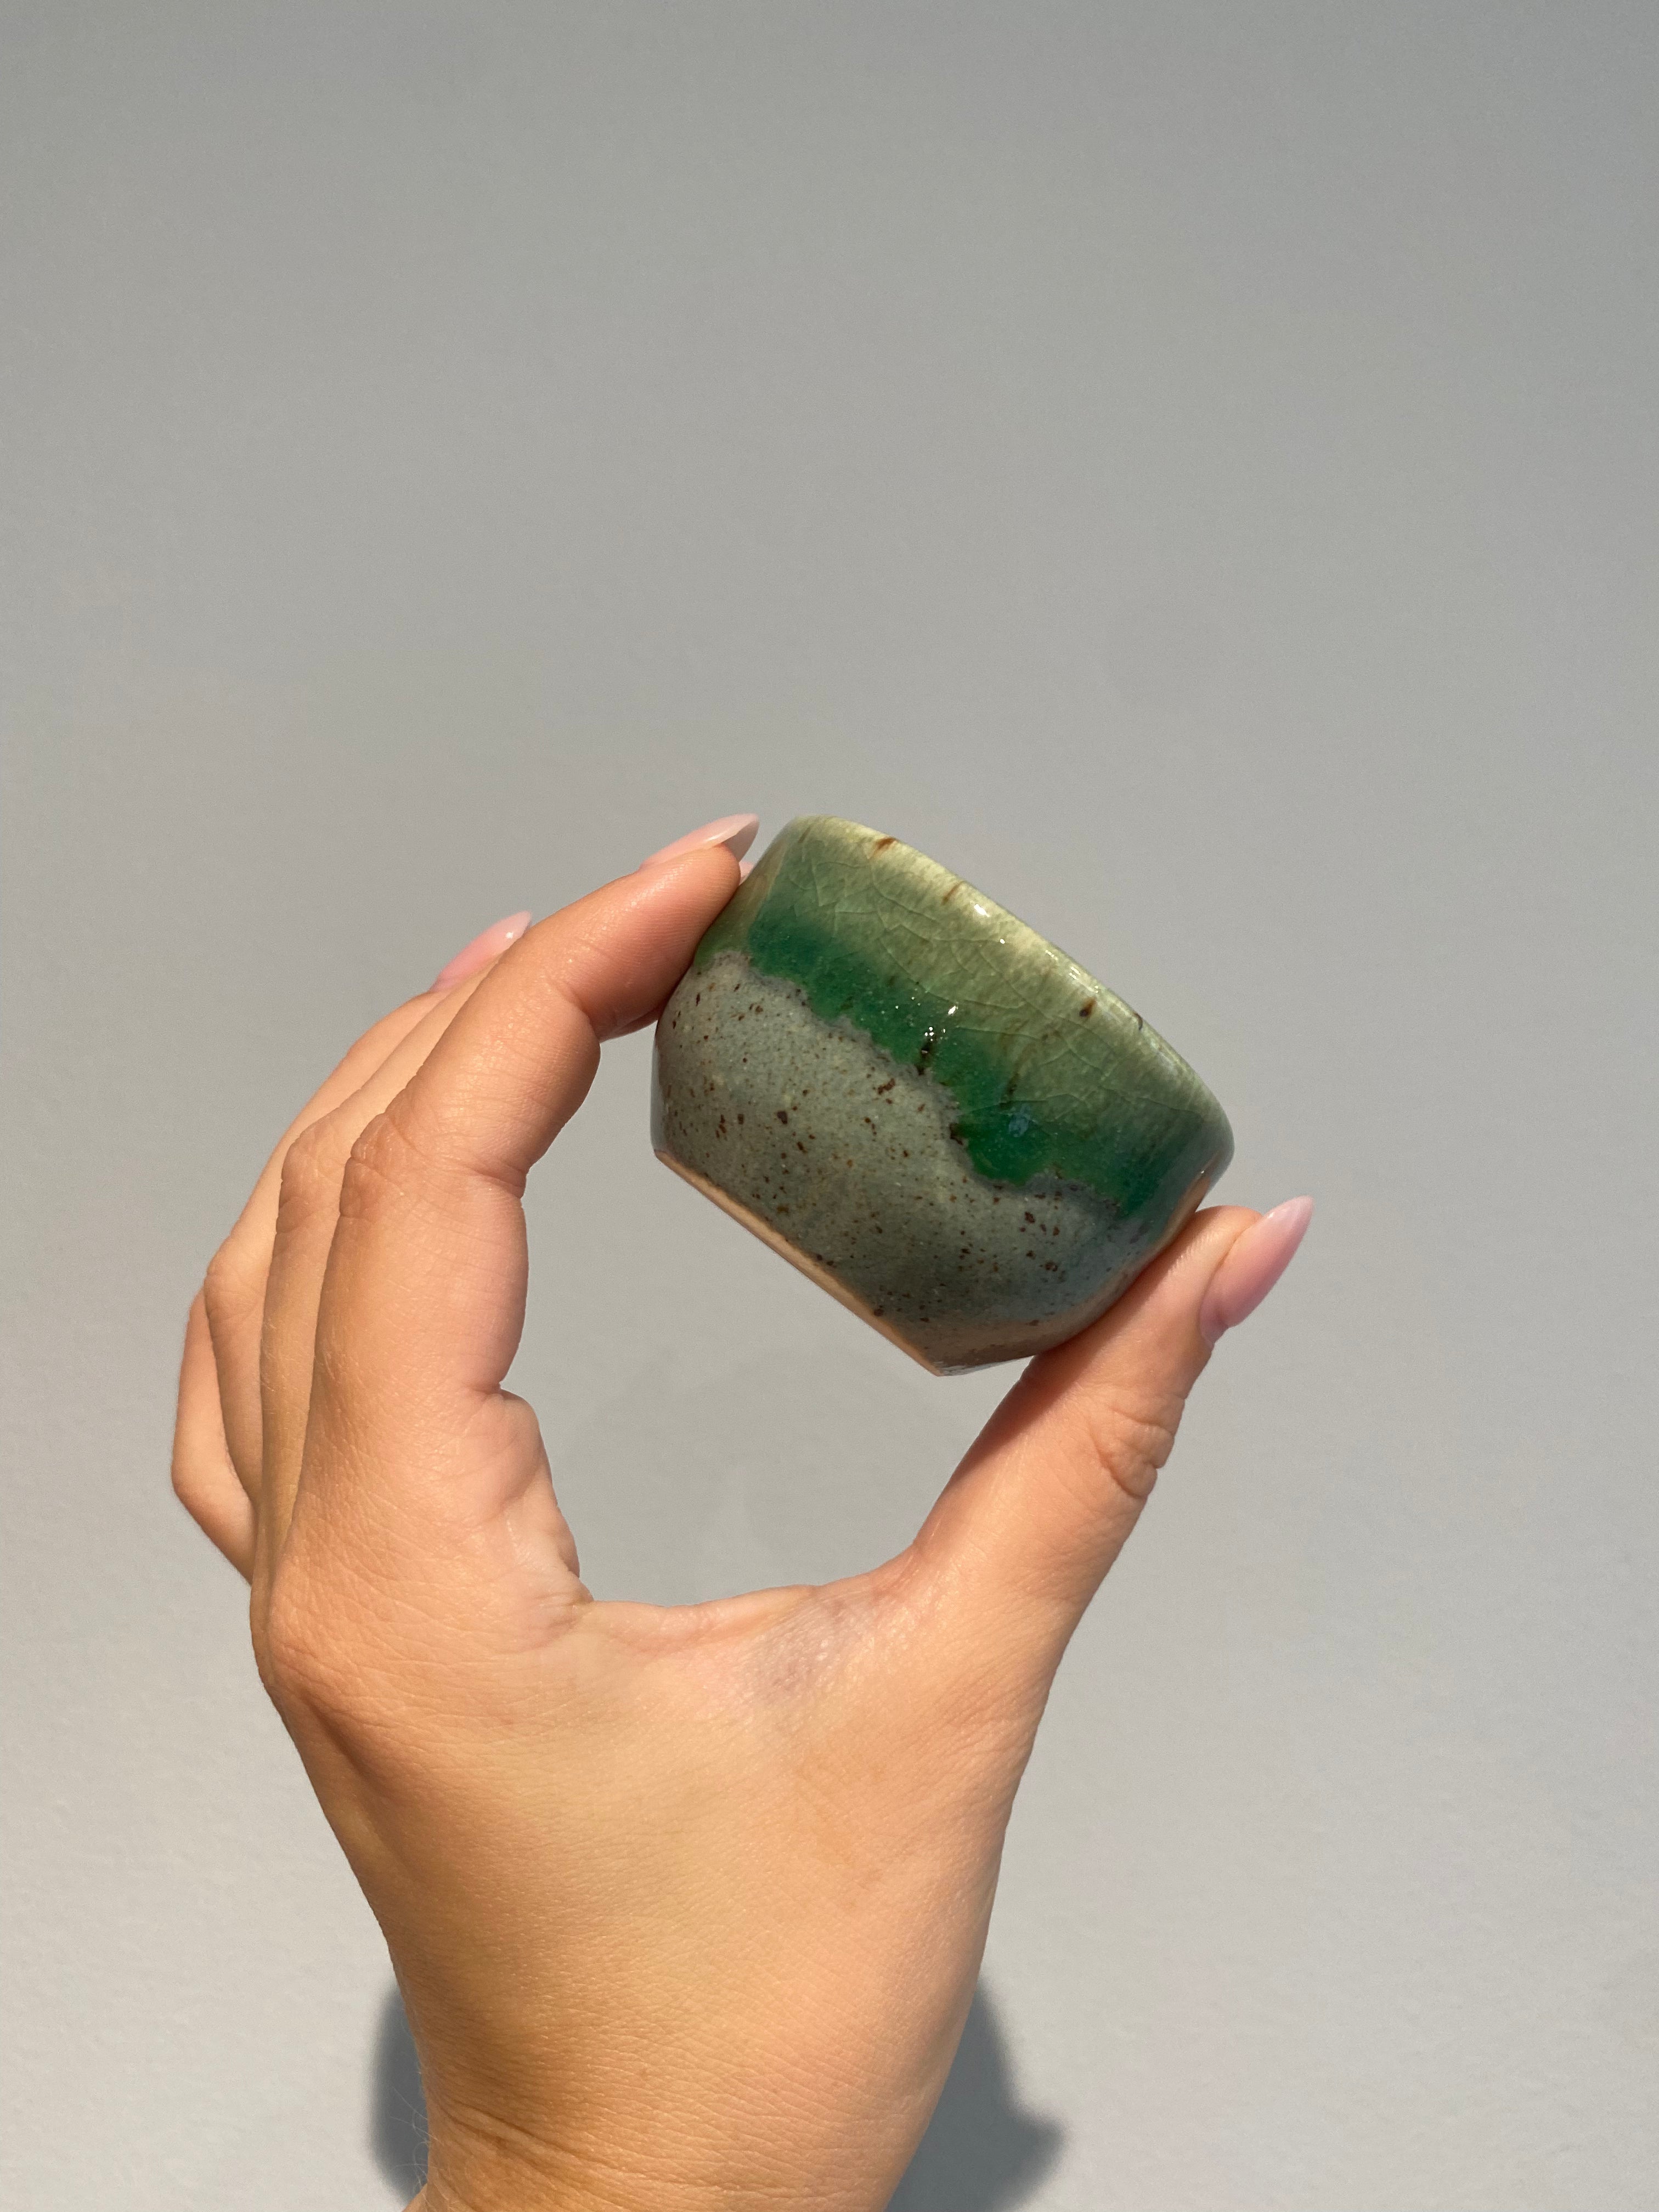 Sake cup with green shades of glaze